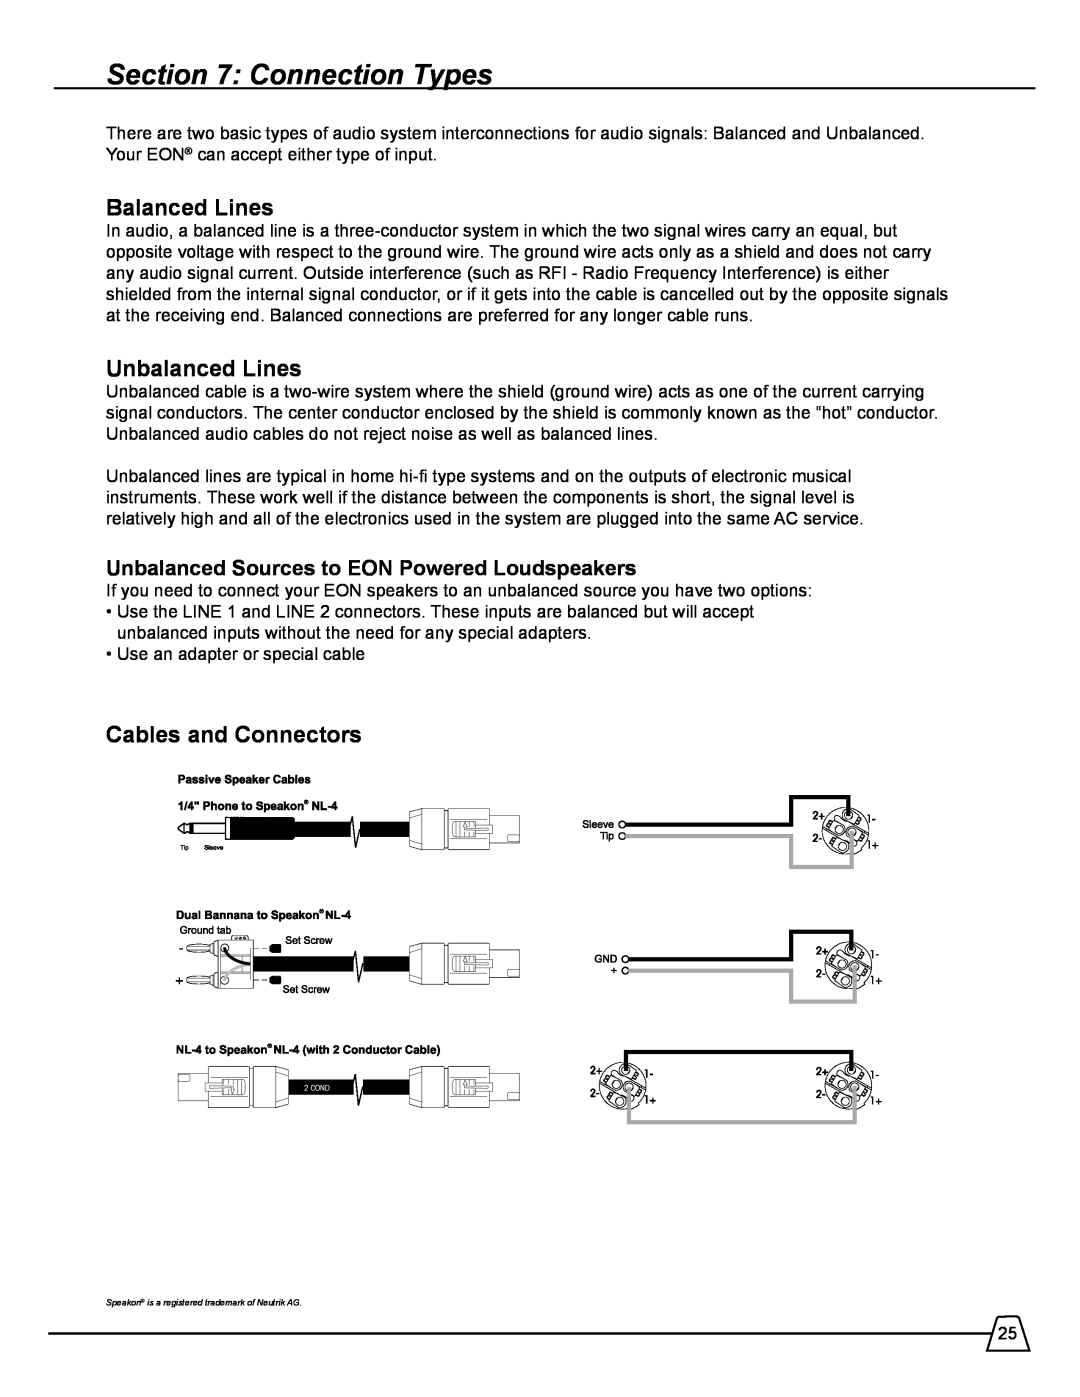 Harman 518S manual Connection Types, Balanced Lines, Unbalanced Lines, Cables and Connectors 